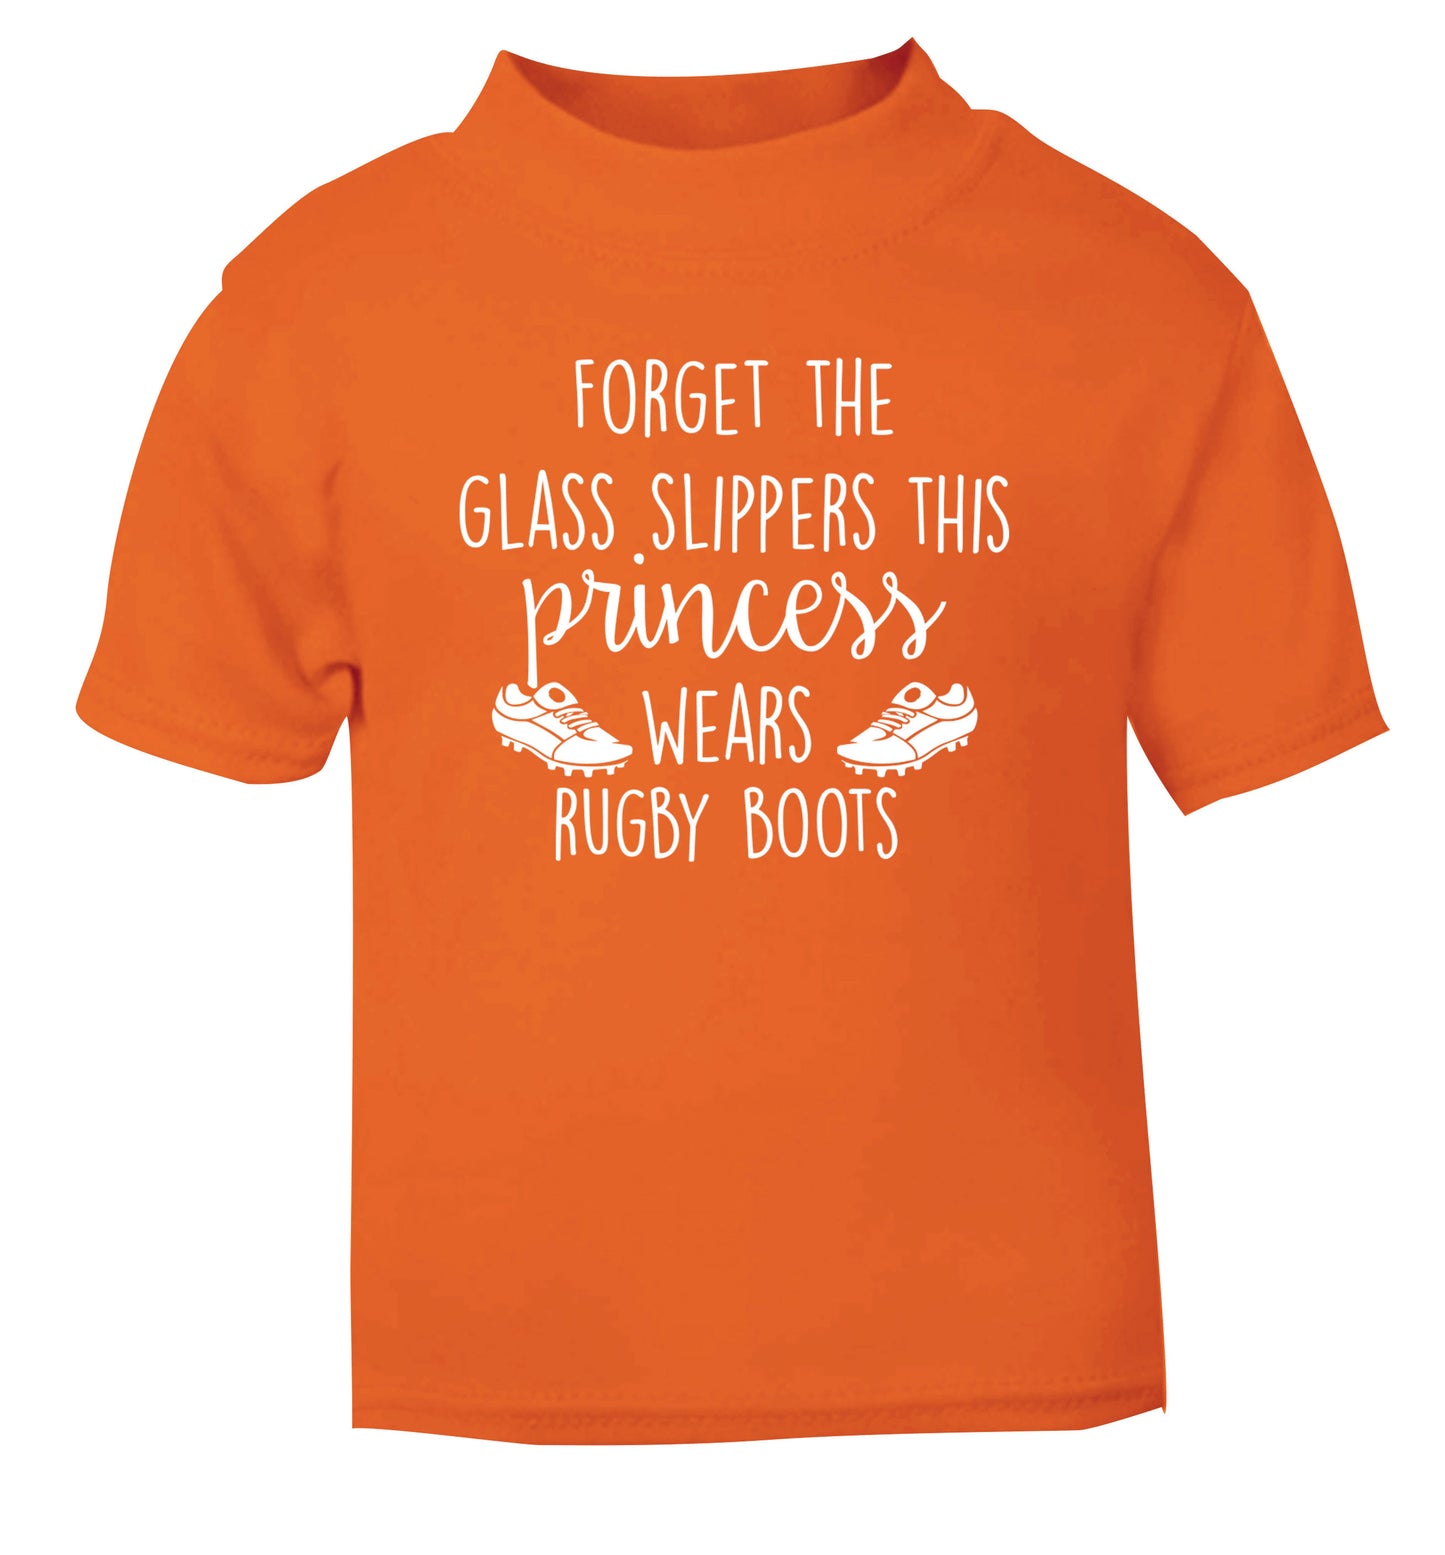 Forget the glass slippers this princess wears rugby boots orange Baby Toddler Tshirt 2 Years